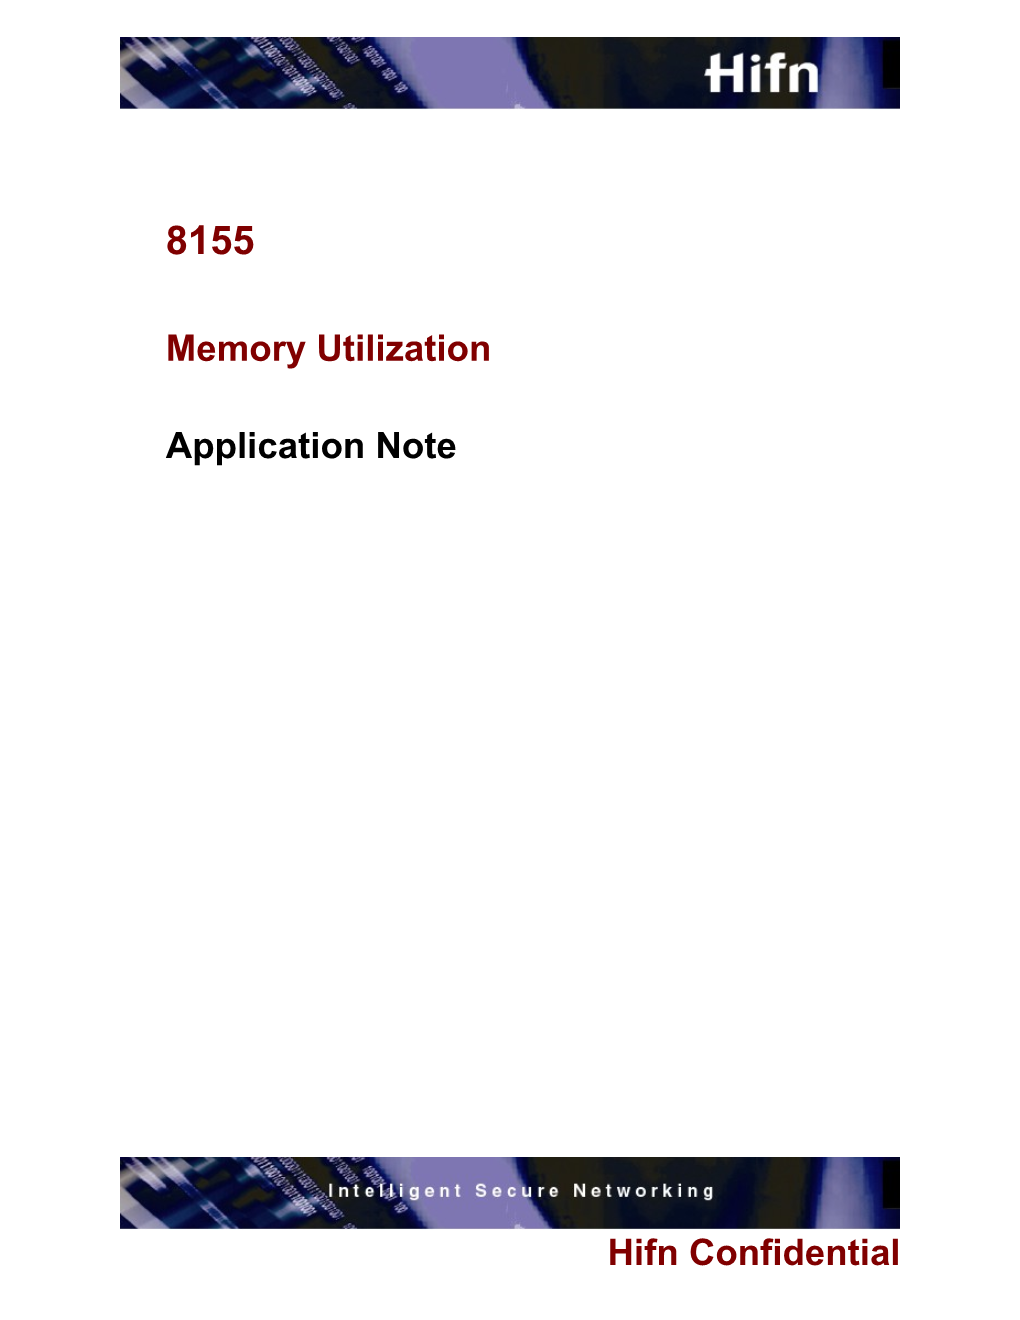 Application Note Template Template